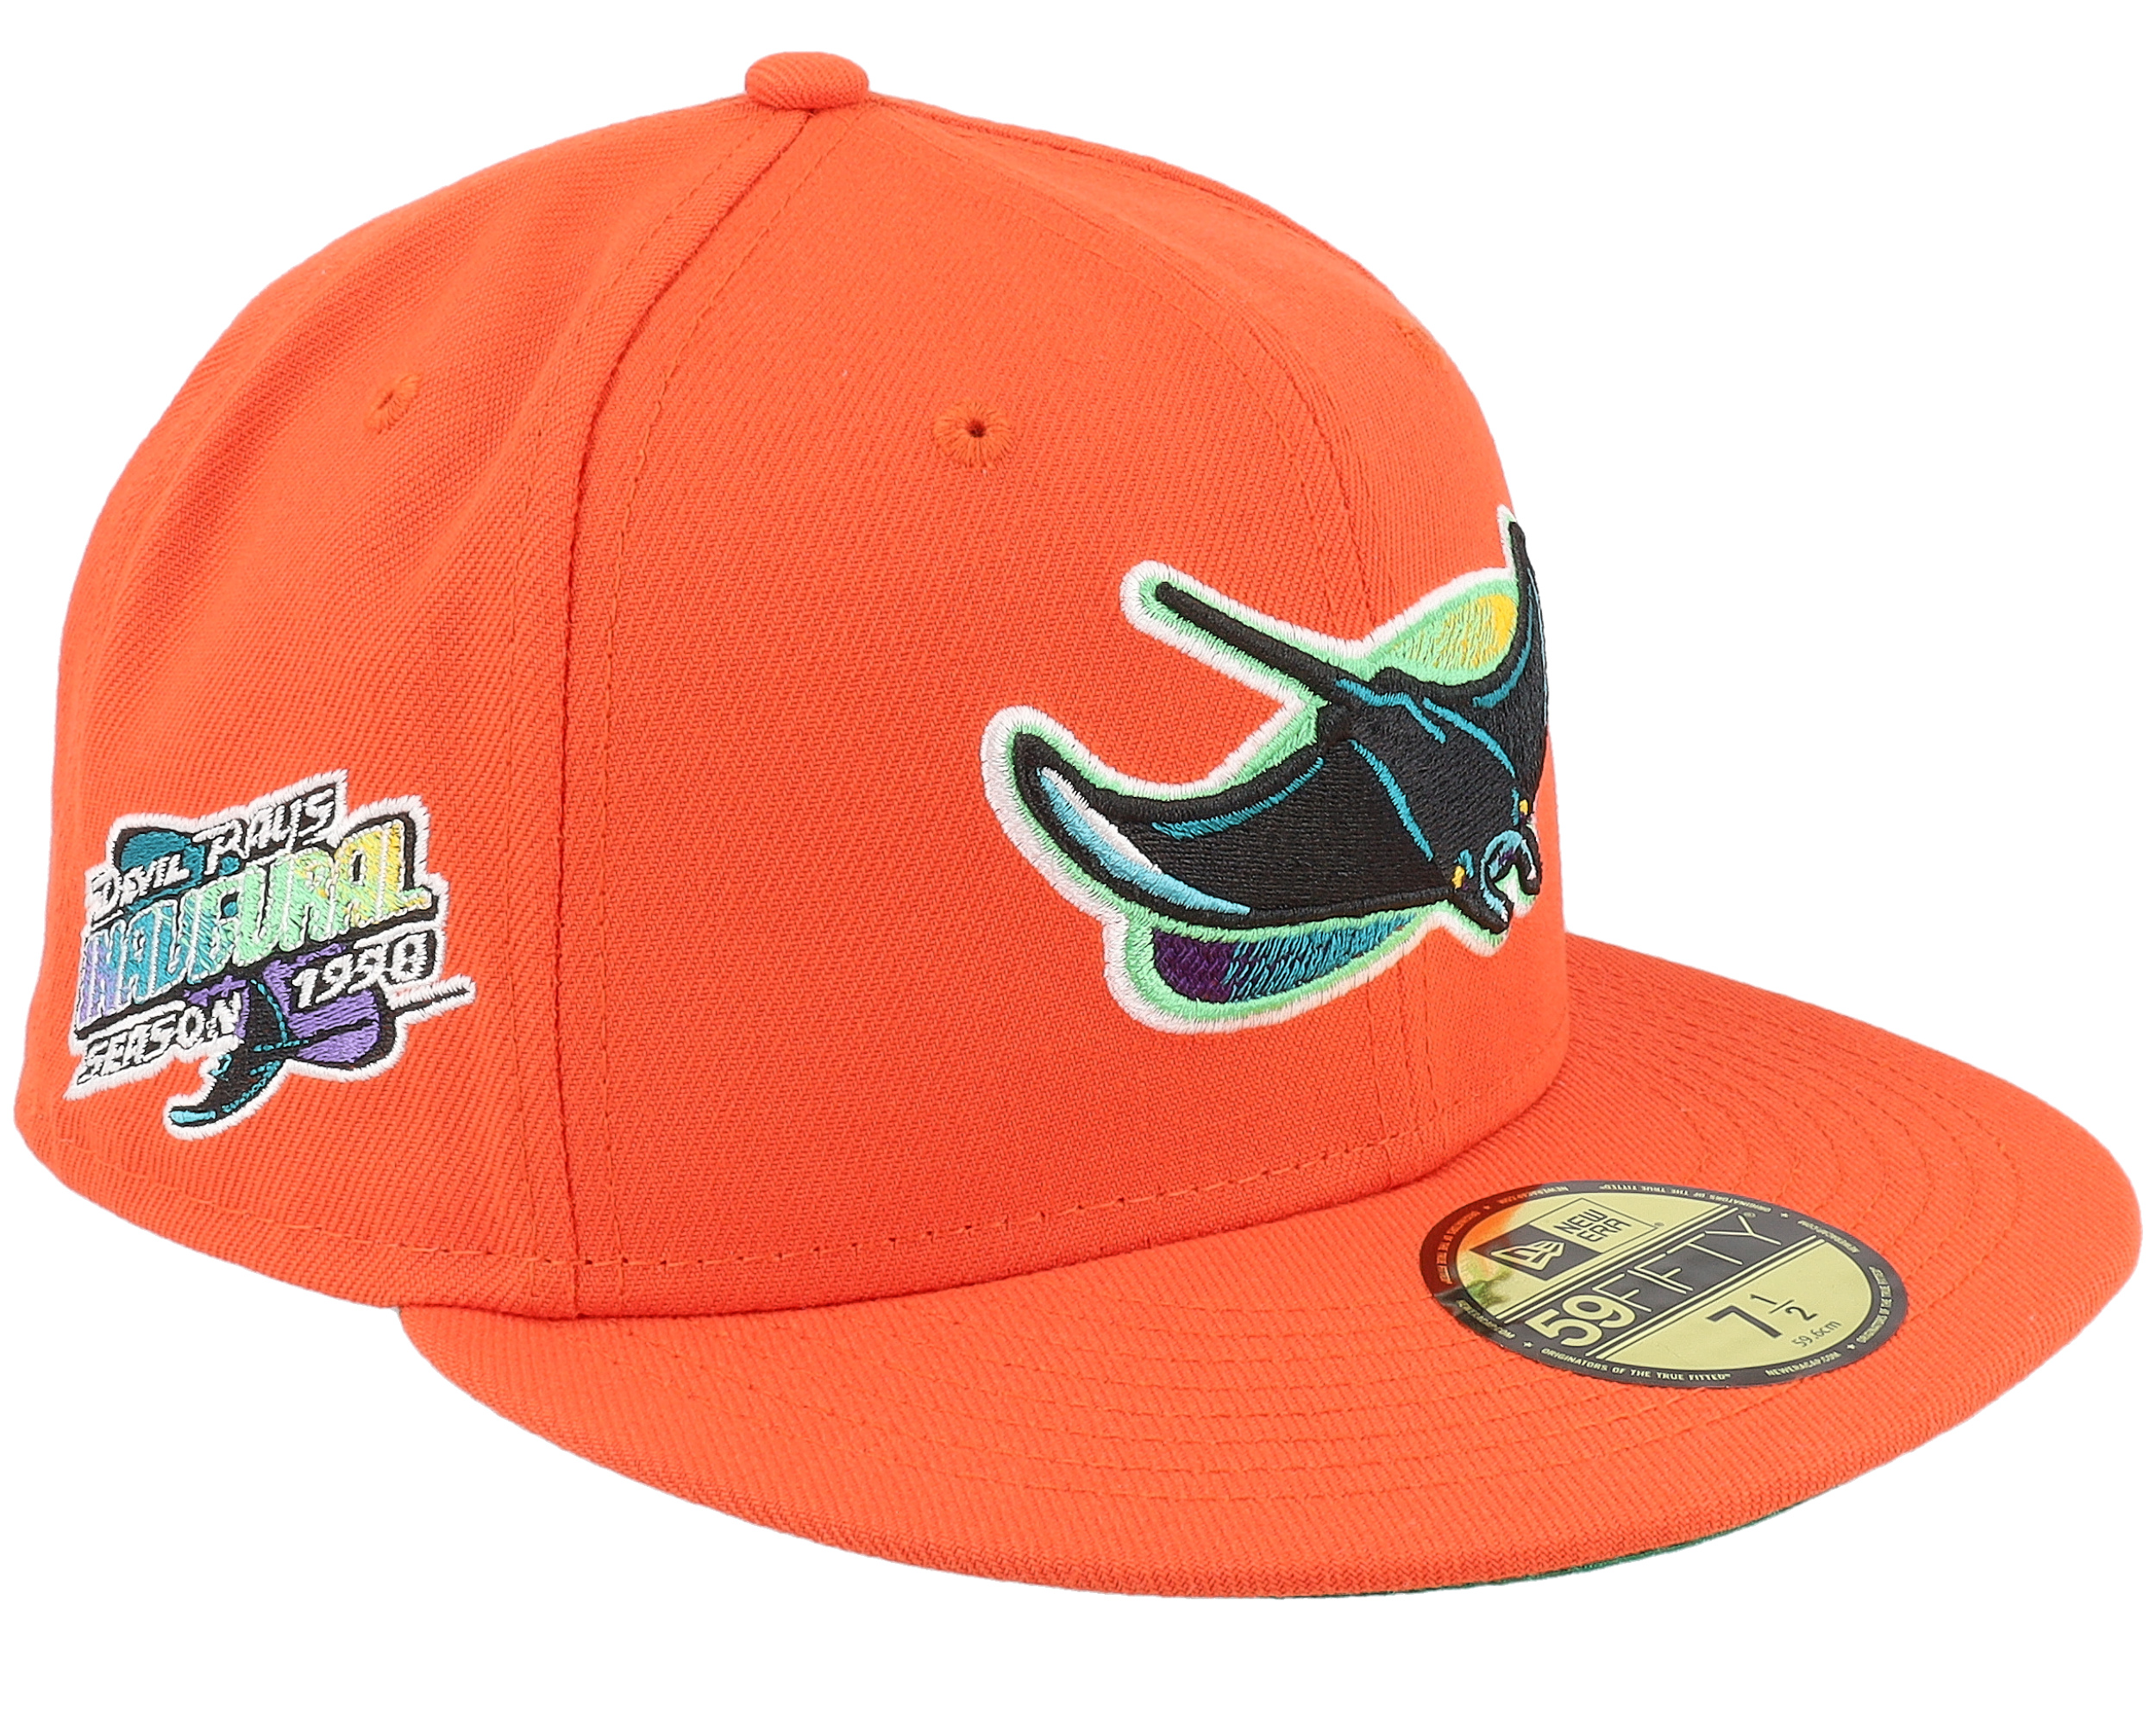 Tampa Bay Rays Candyland 59FIFTY Orange/Green Fitted - New Era cap